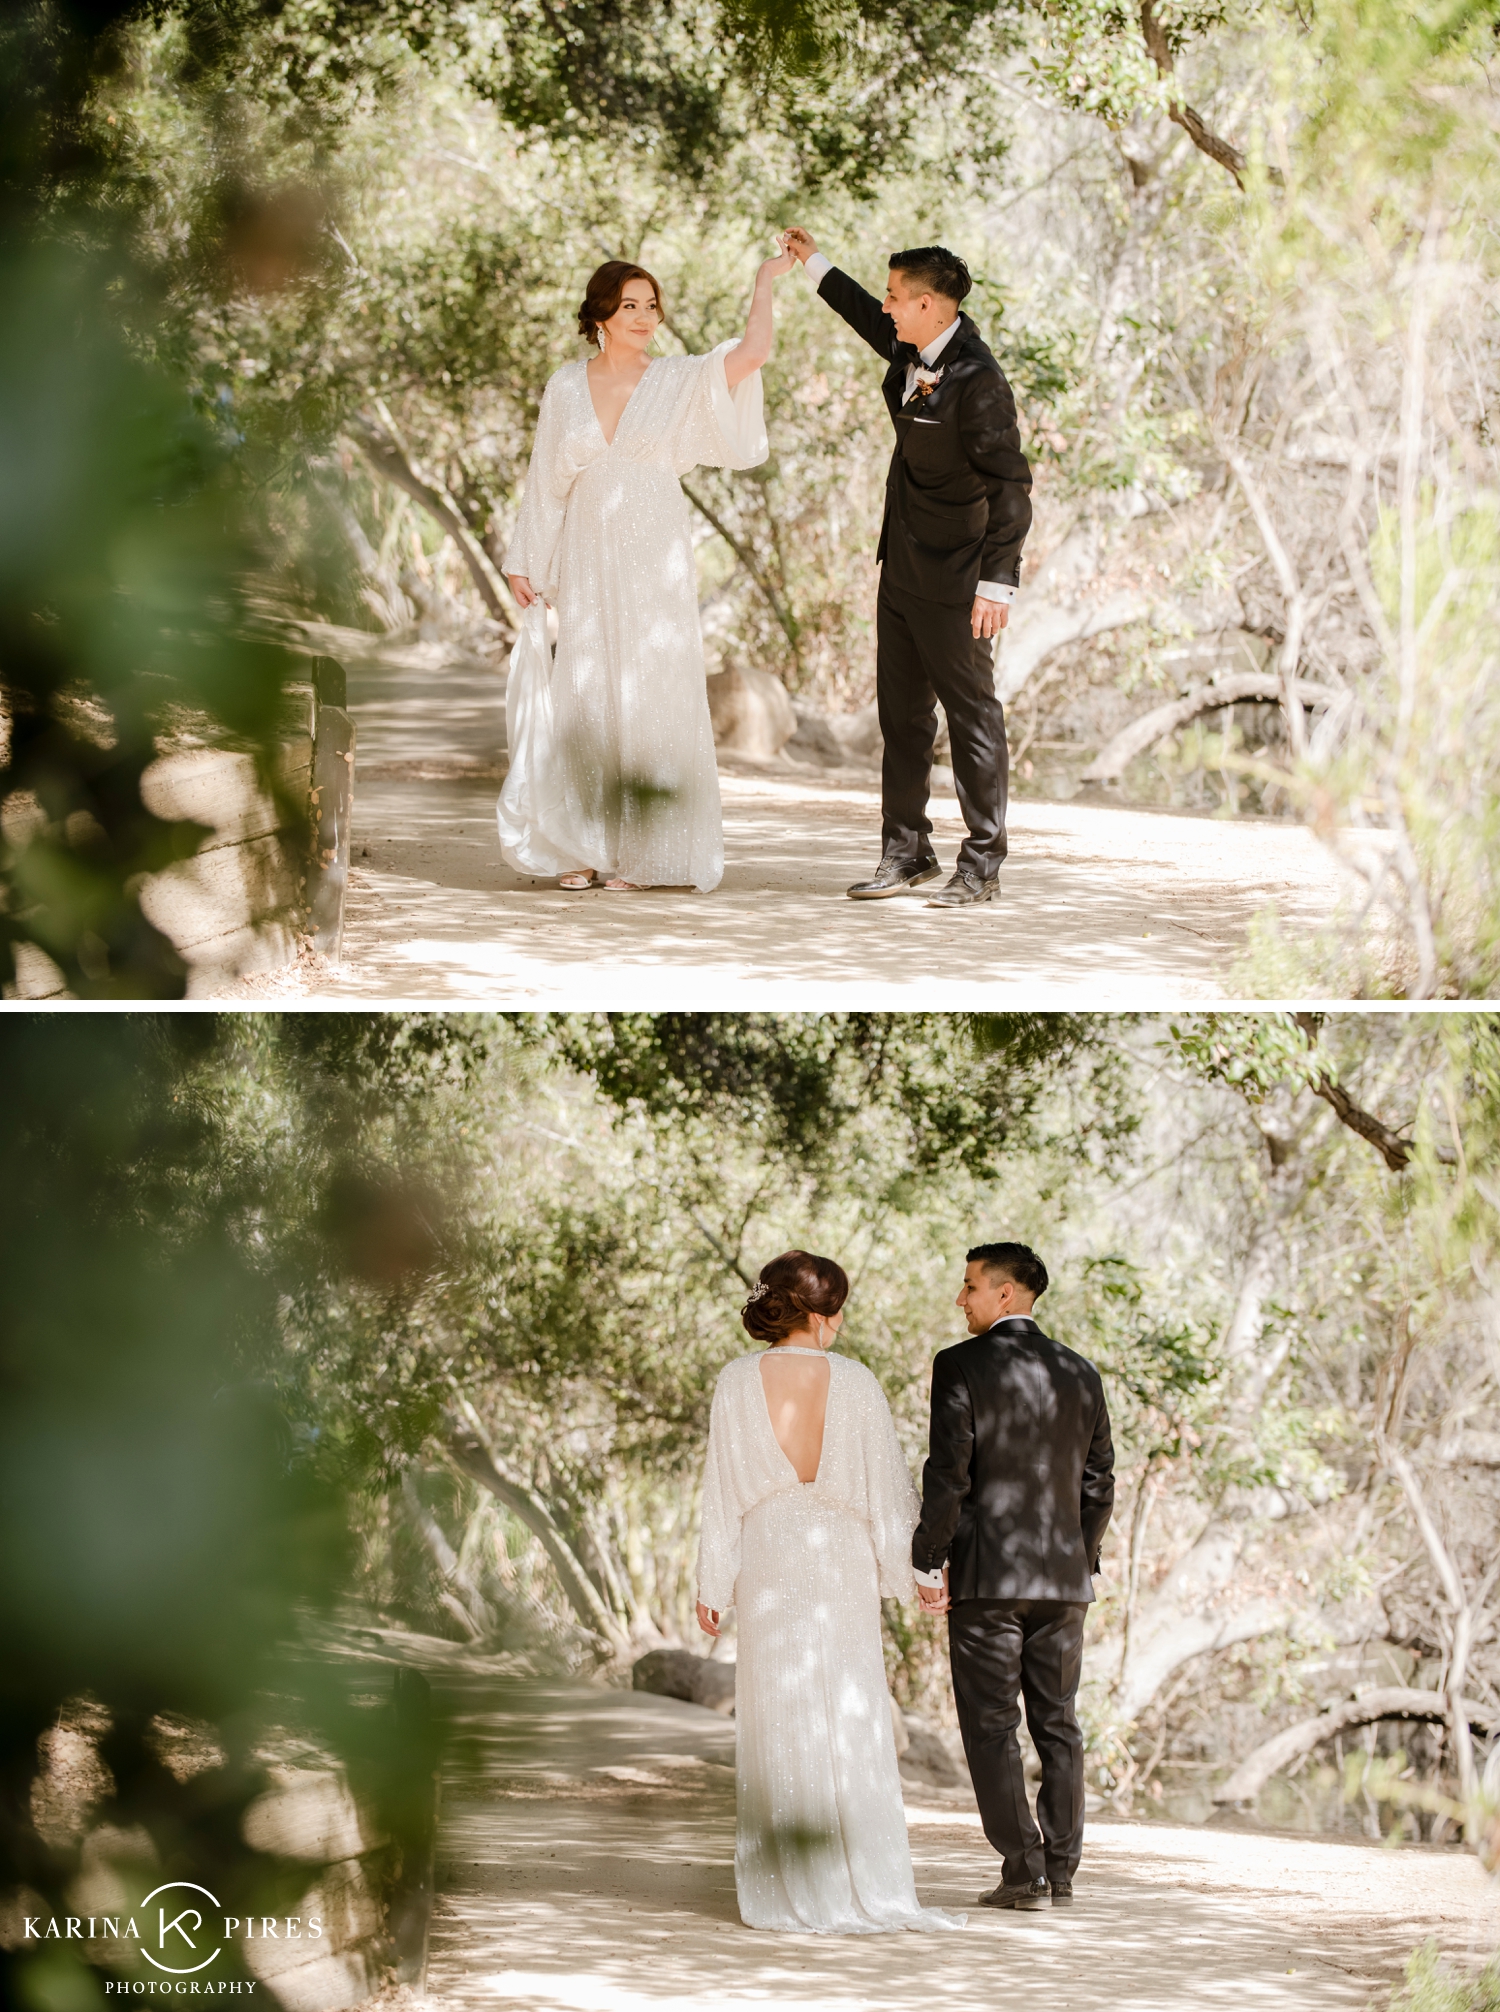 A Surprise Forest Elopement for Essential Workers in Los Angeles - Featured on Inside Weddings